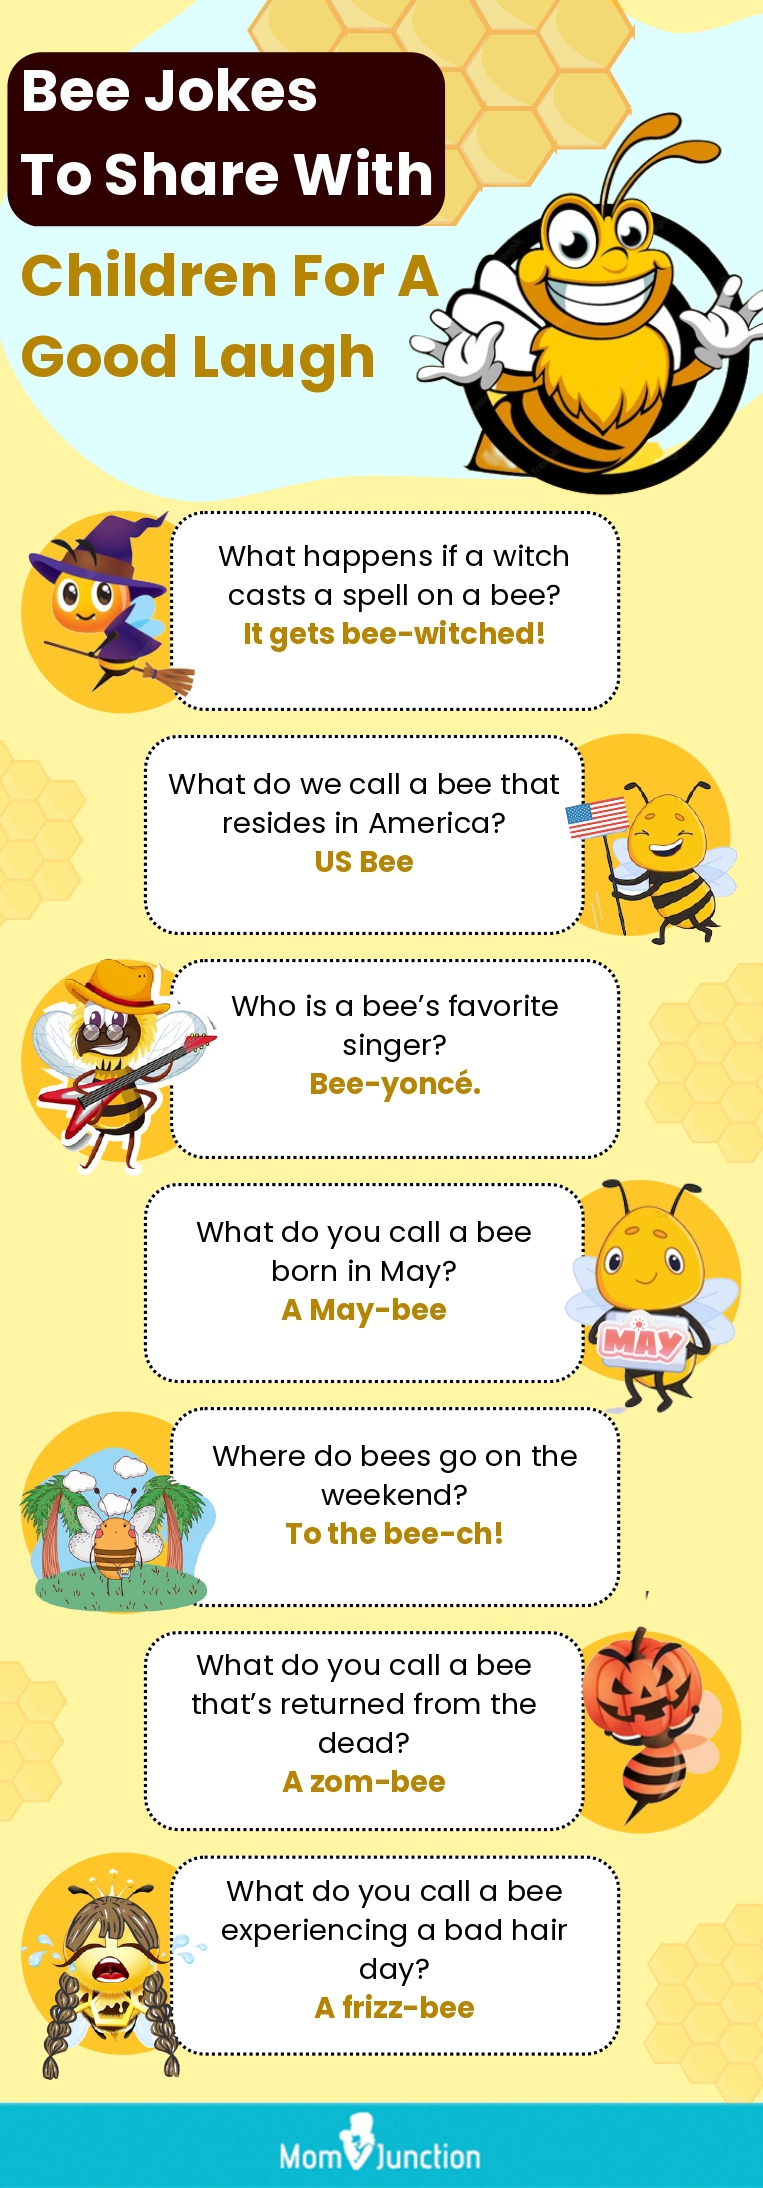 bee jokes to share with children for a good laugh(infographic)